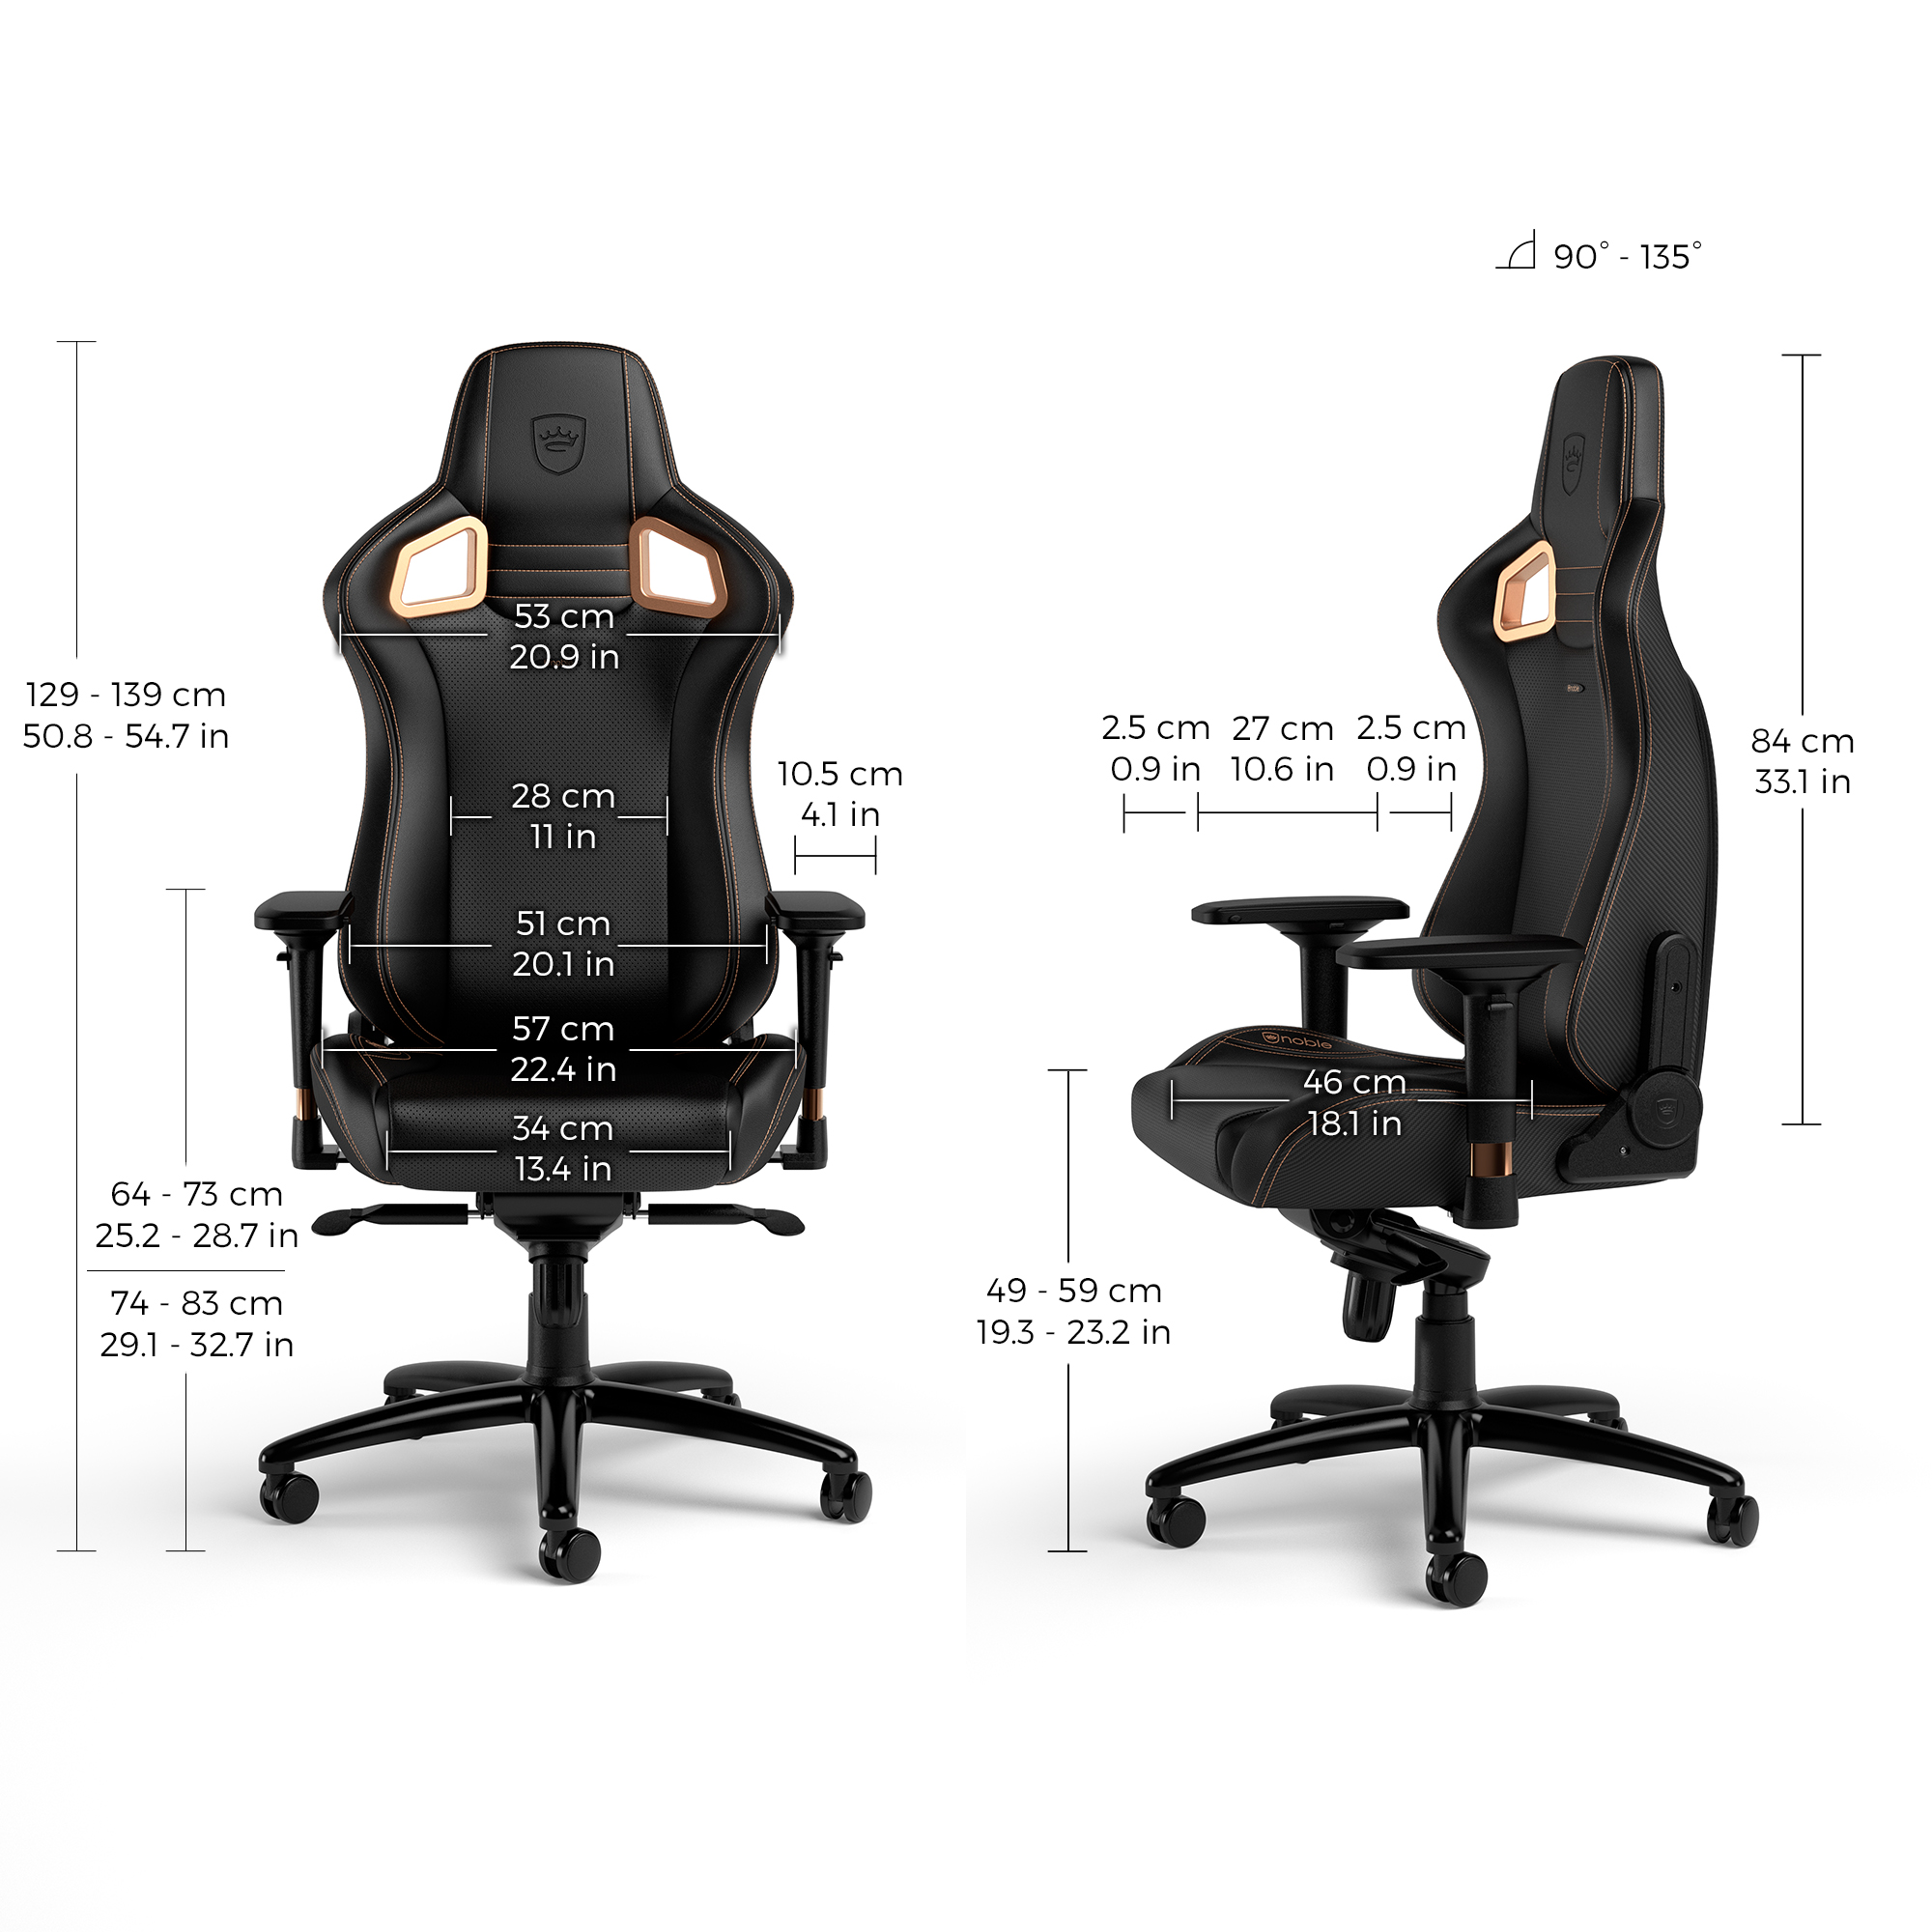 noblechairs - noblechairs EPIC Gaming Chair Limited Edition Copper - BlackCopper